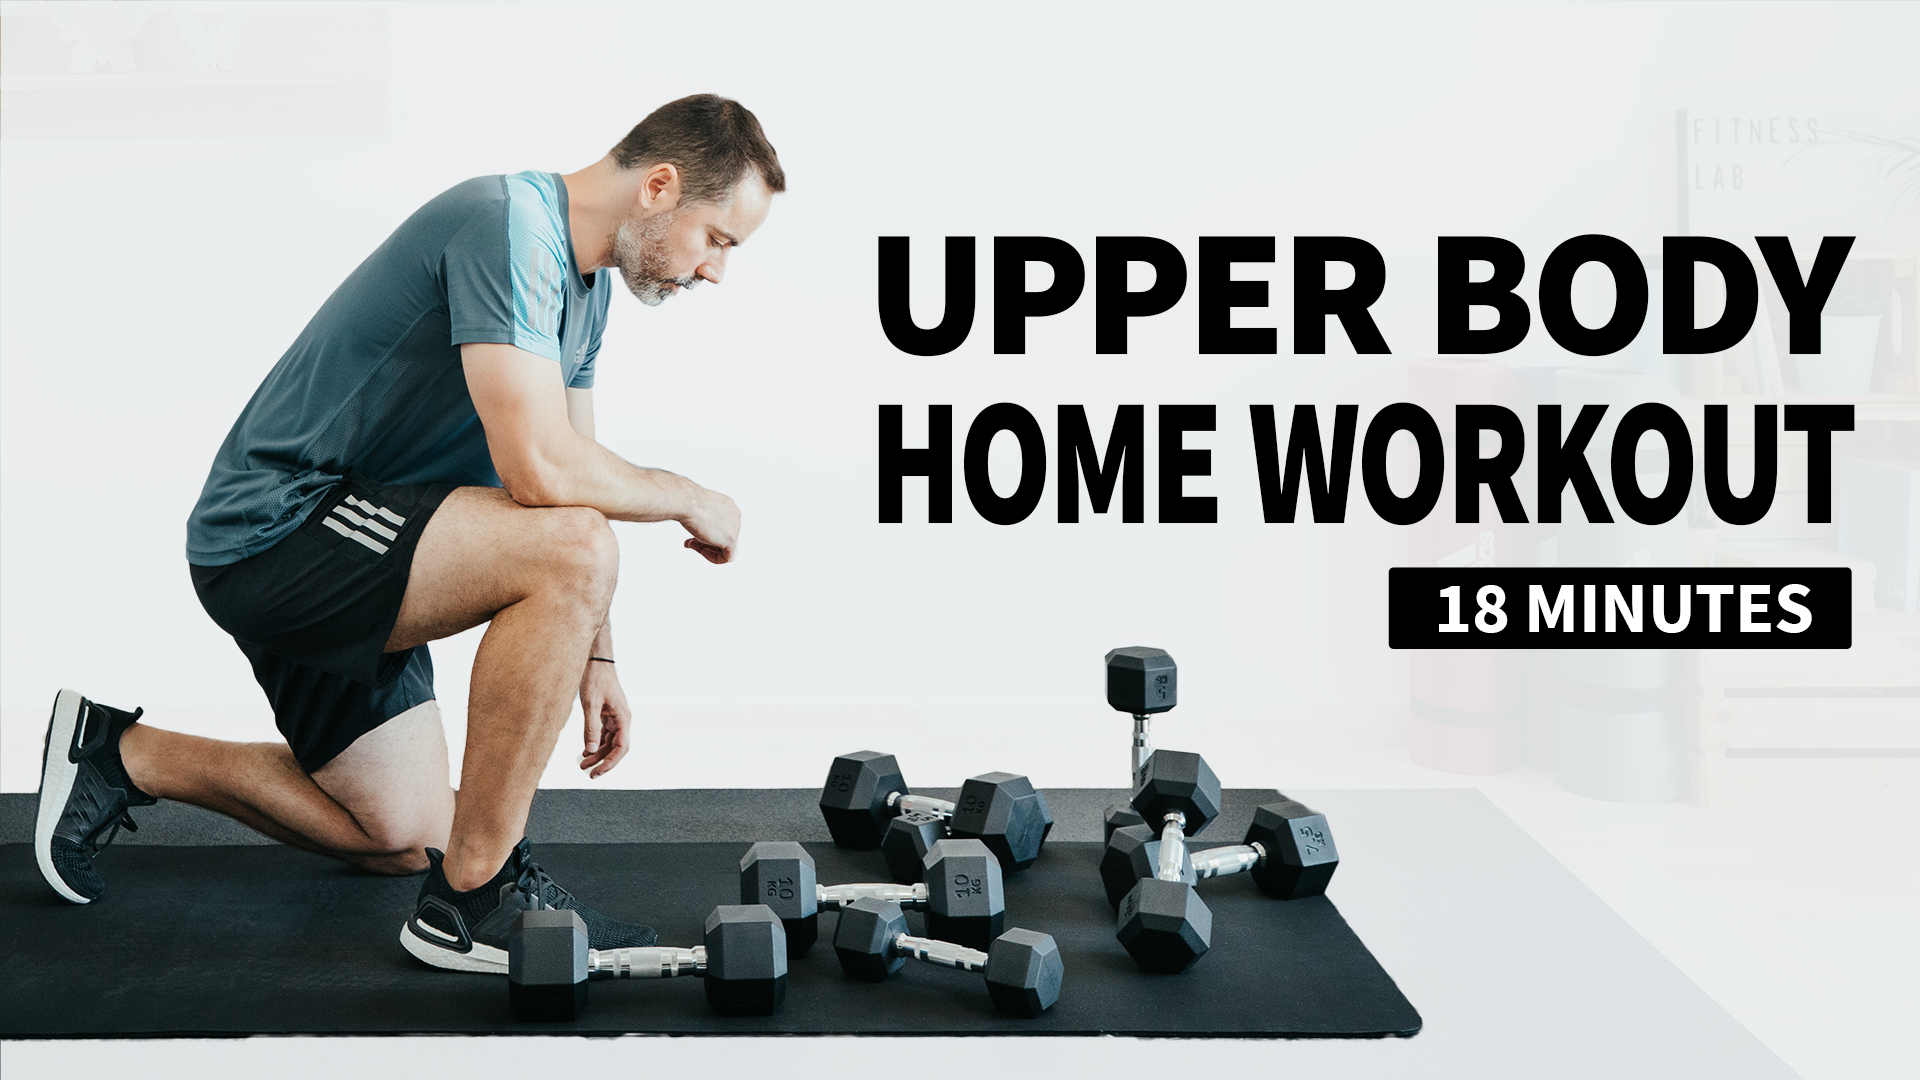 How to Train Upper Body at Home